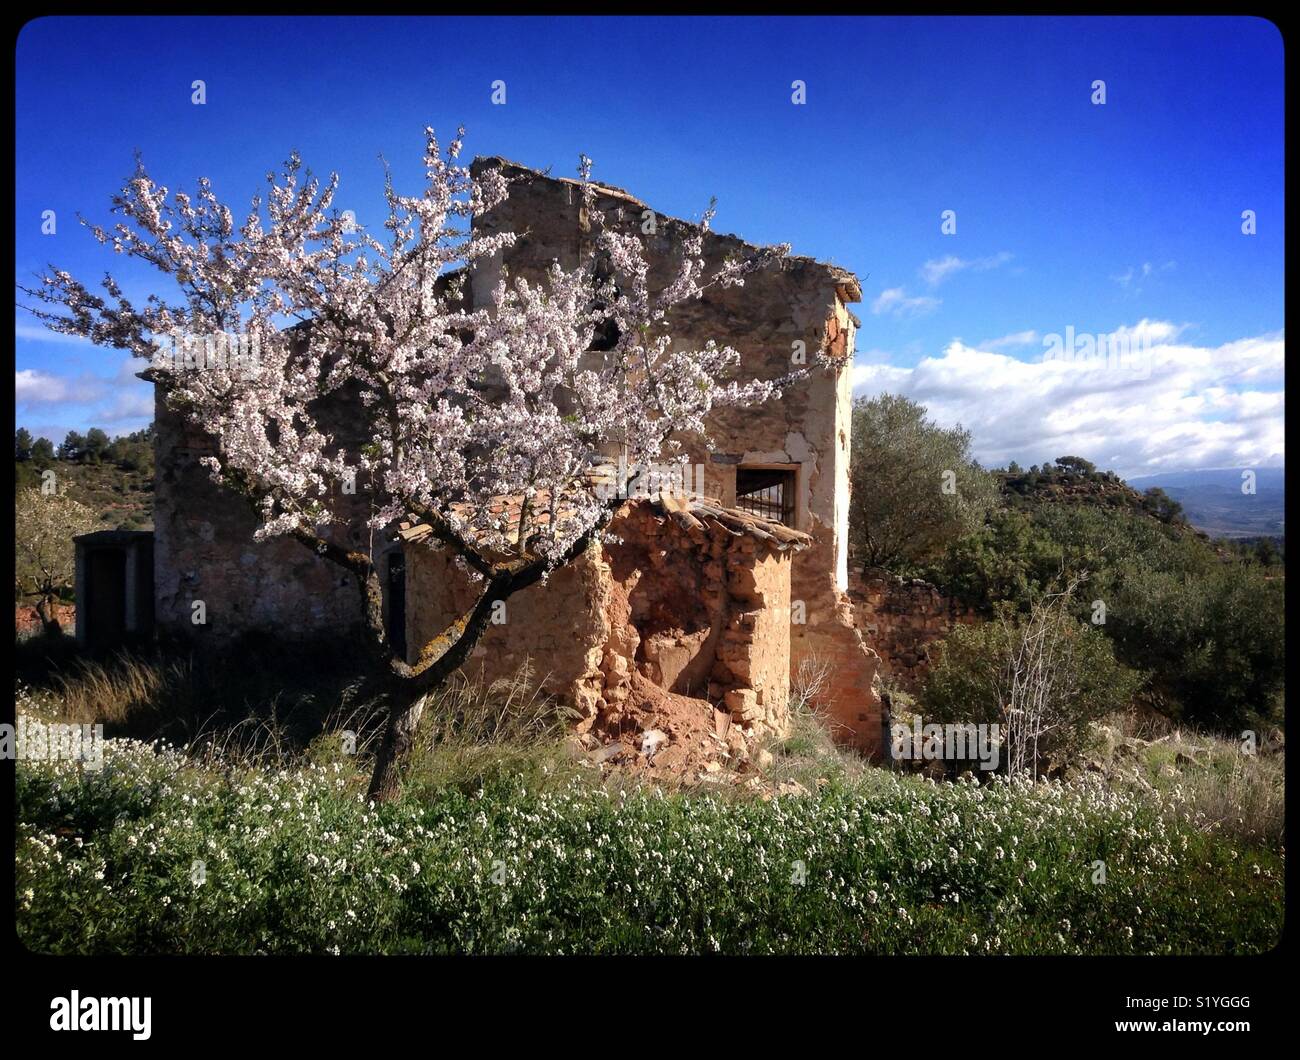 Abandoned building and an almond tree in blossom, Catalonia, Spain. Stock Photo